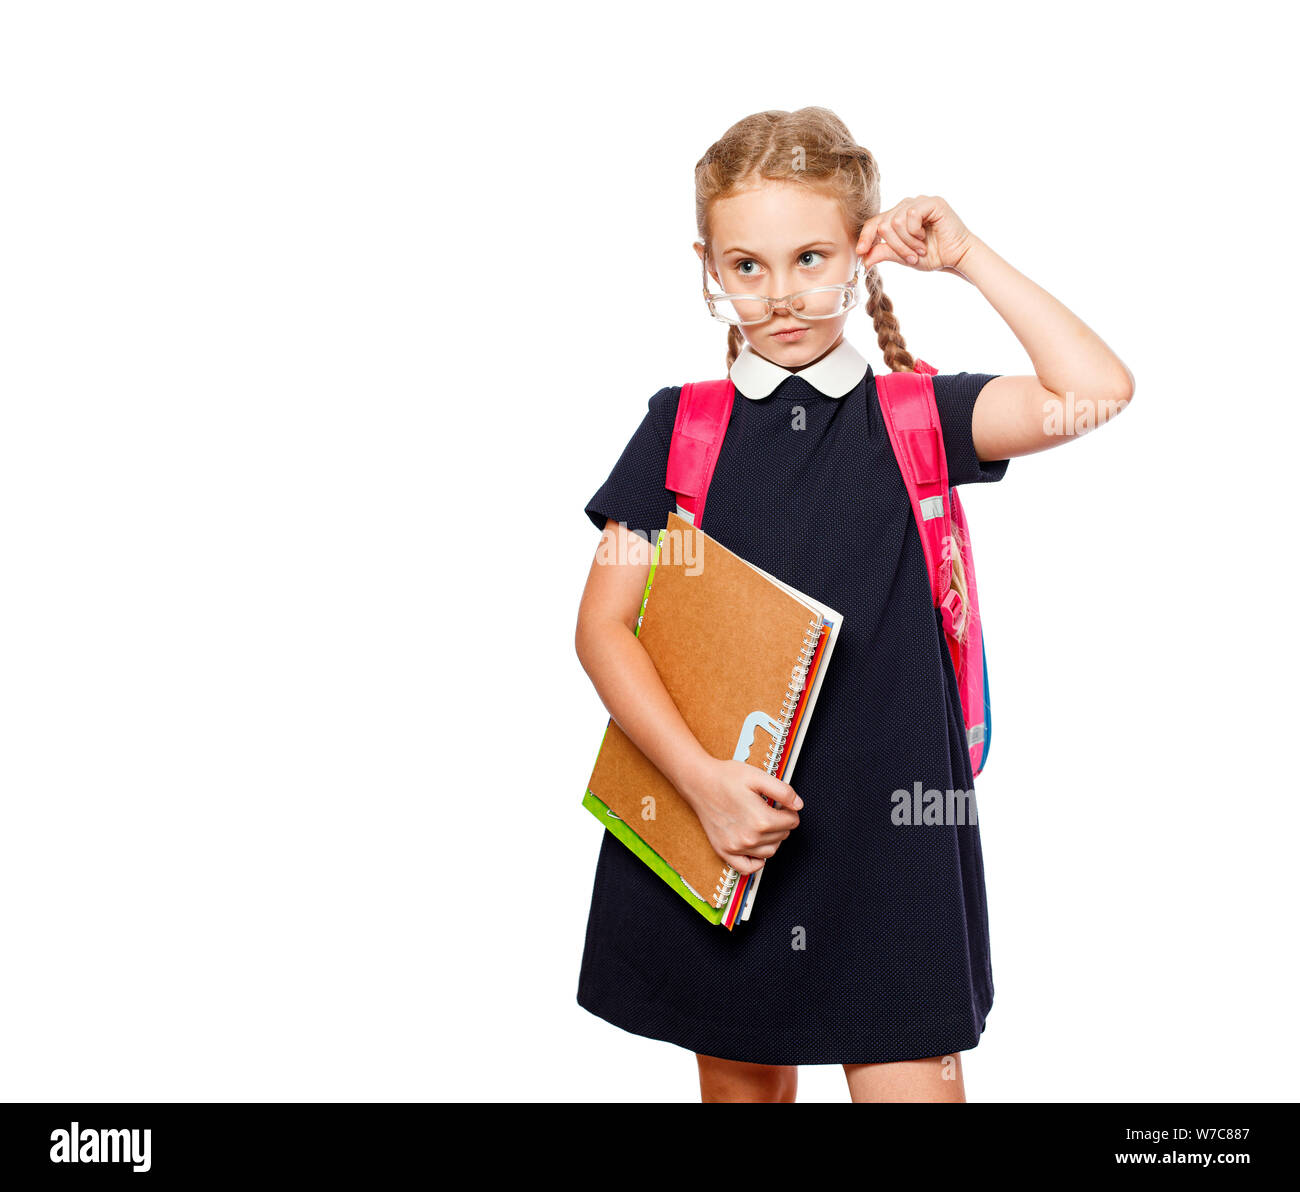 8 years old schoolgirl with a backpack wearing uniform standing isolated over a white background. Ready for school Stock Photo